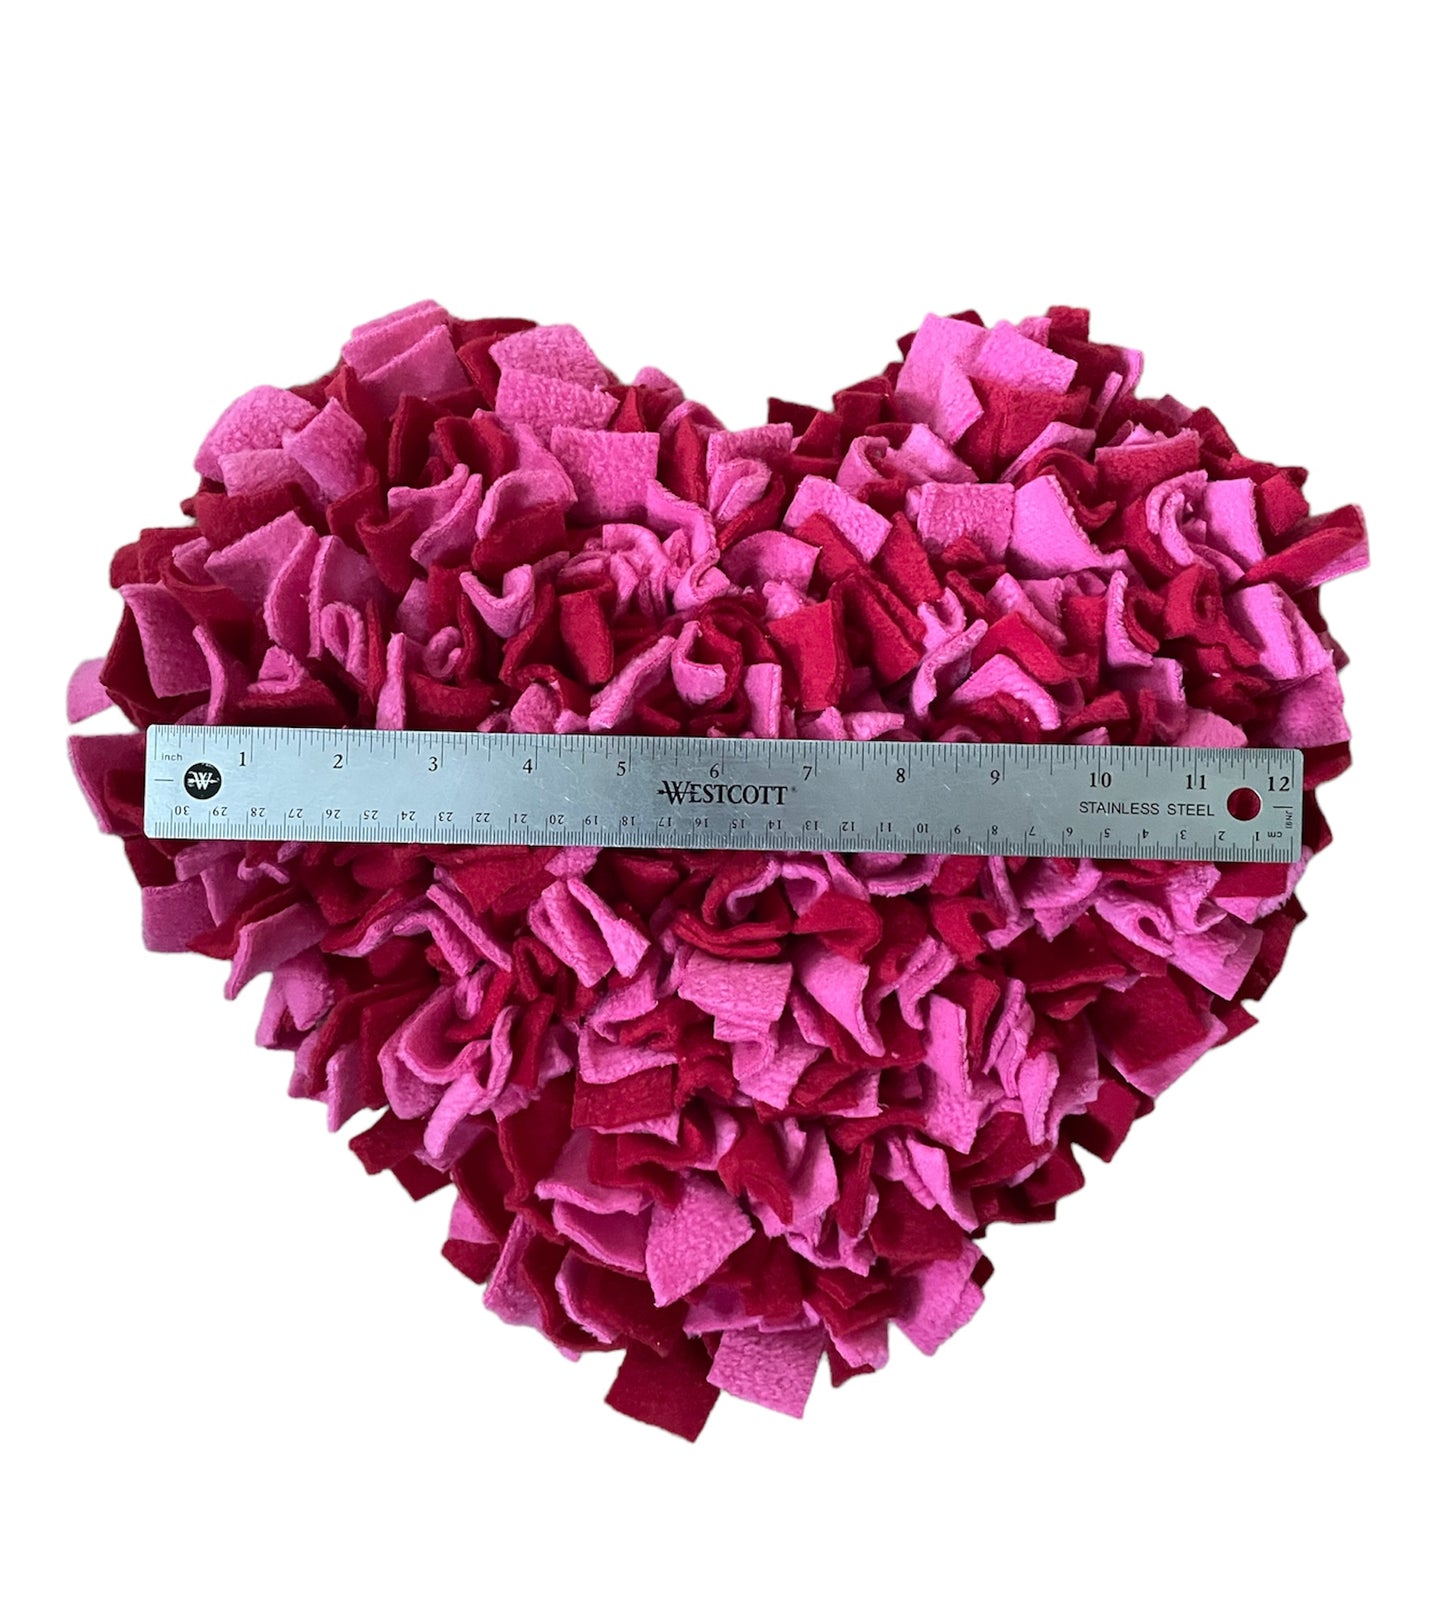 Heart snuffle mat - choose your colours